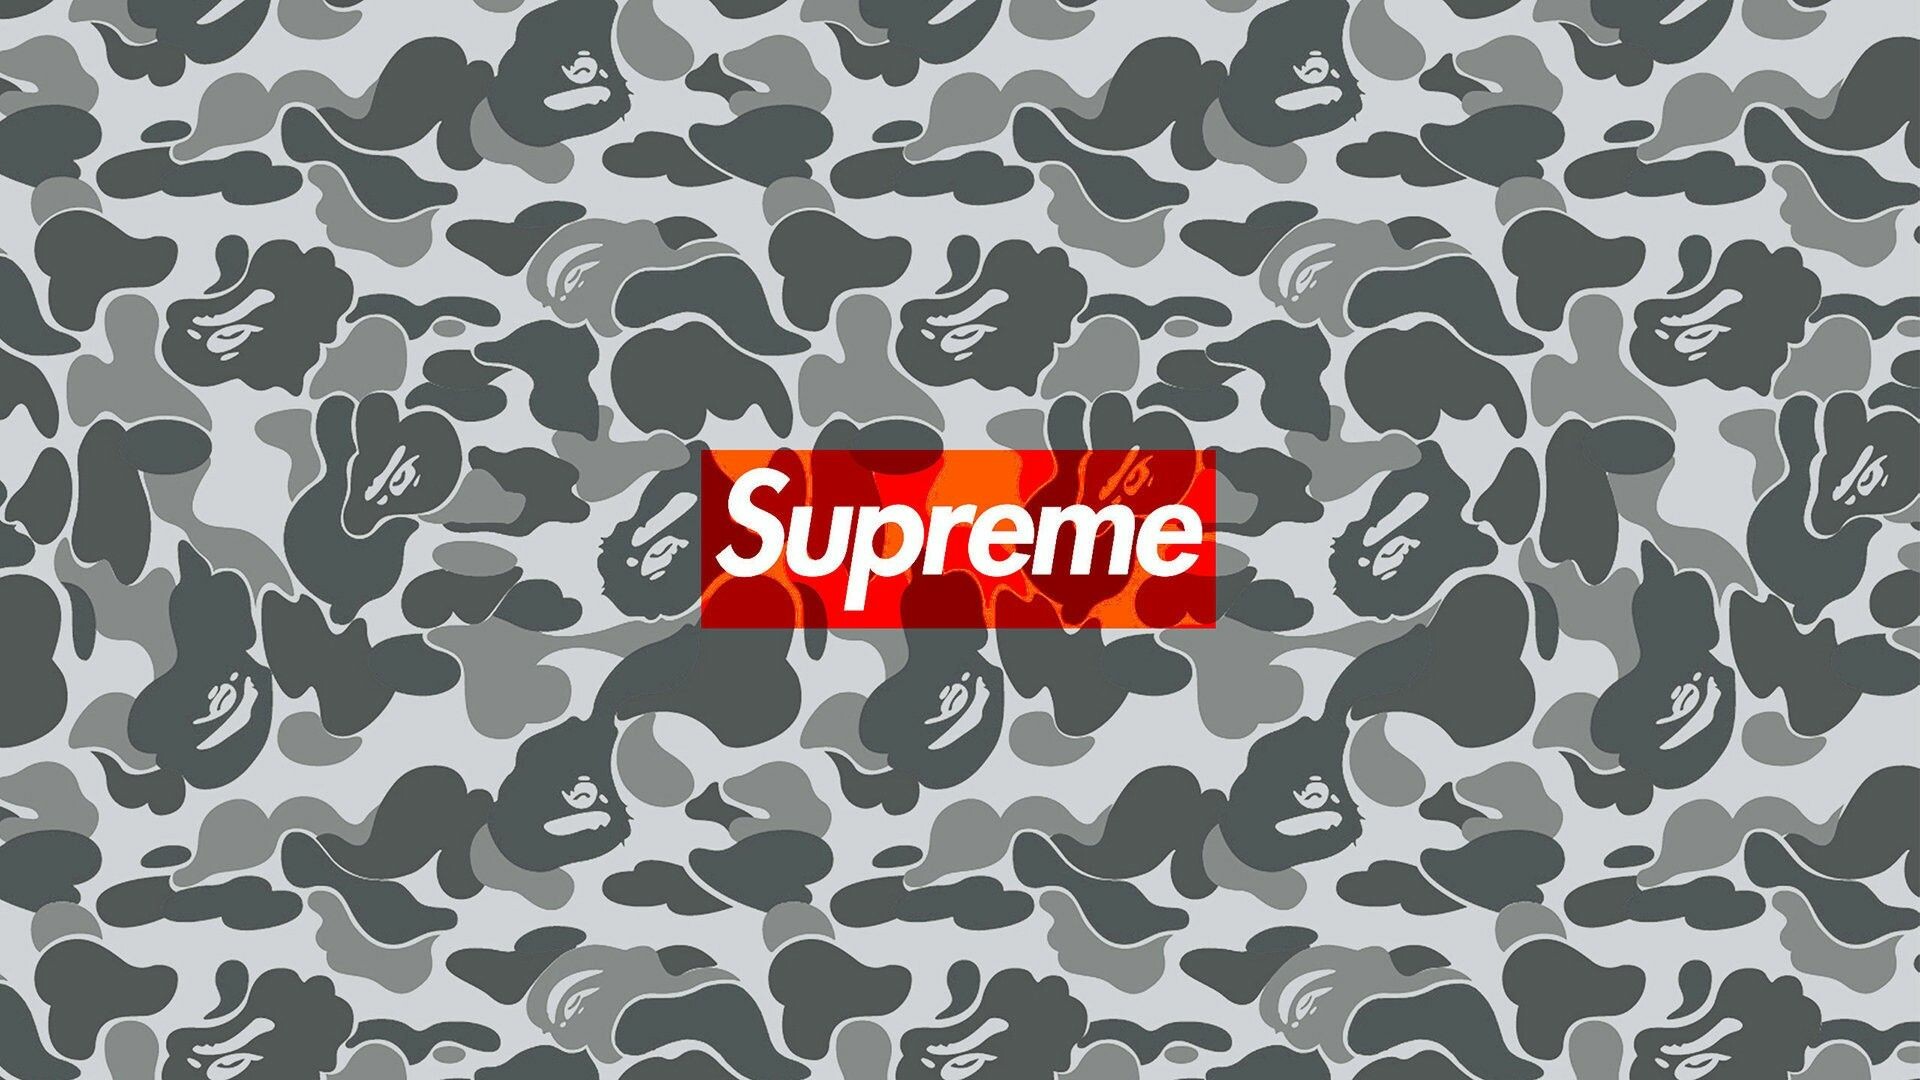 Supreme wallpaper ·① Download free High Resolution backgrounds for ...